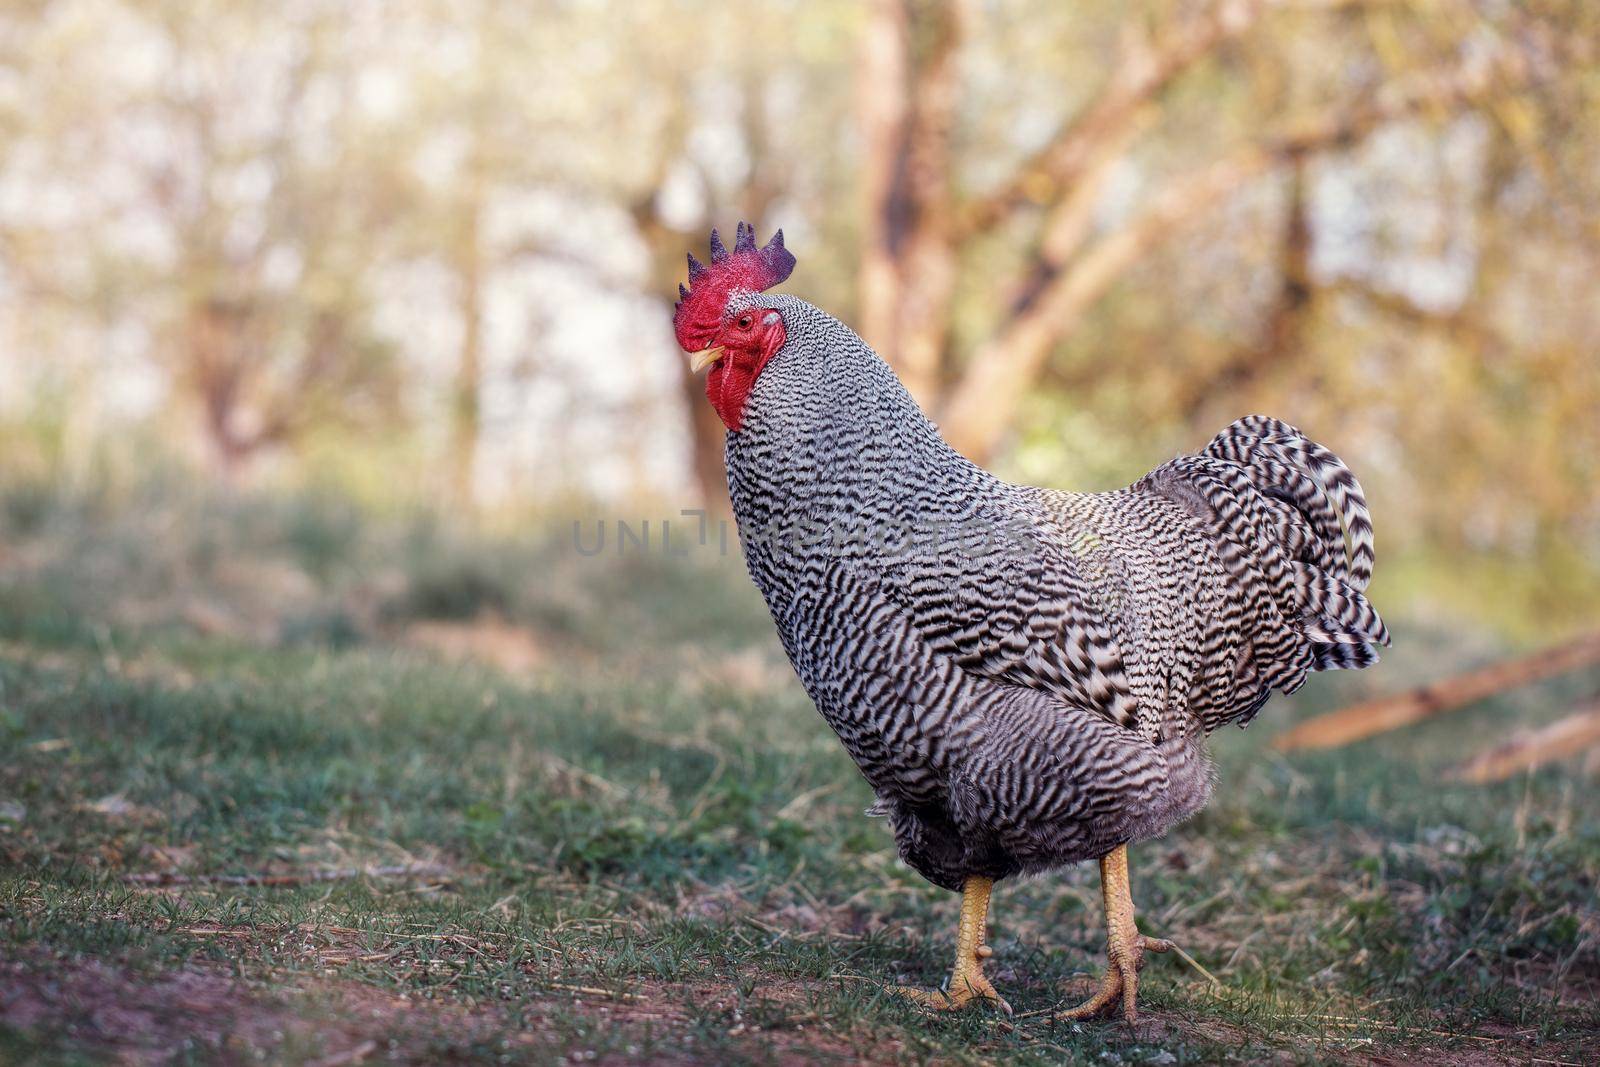 A speckled black-and-white rooster walks in the yard in a nature background 